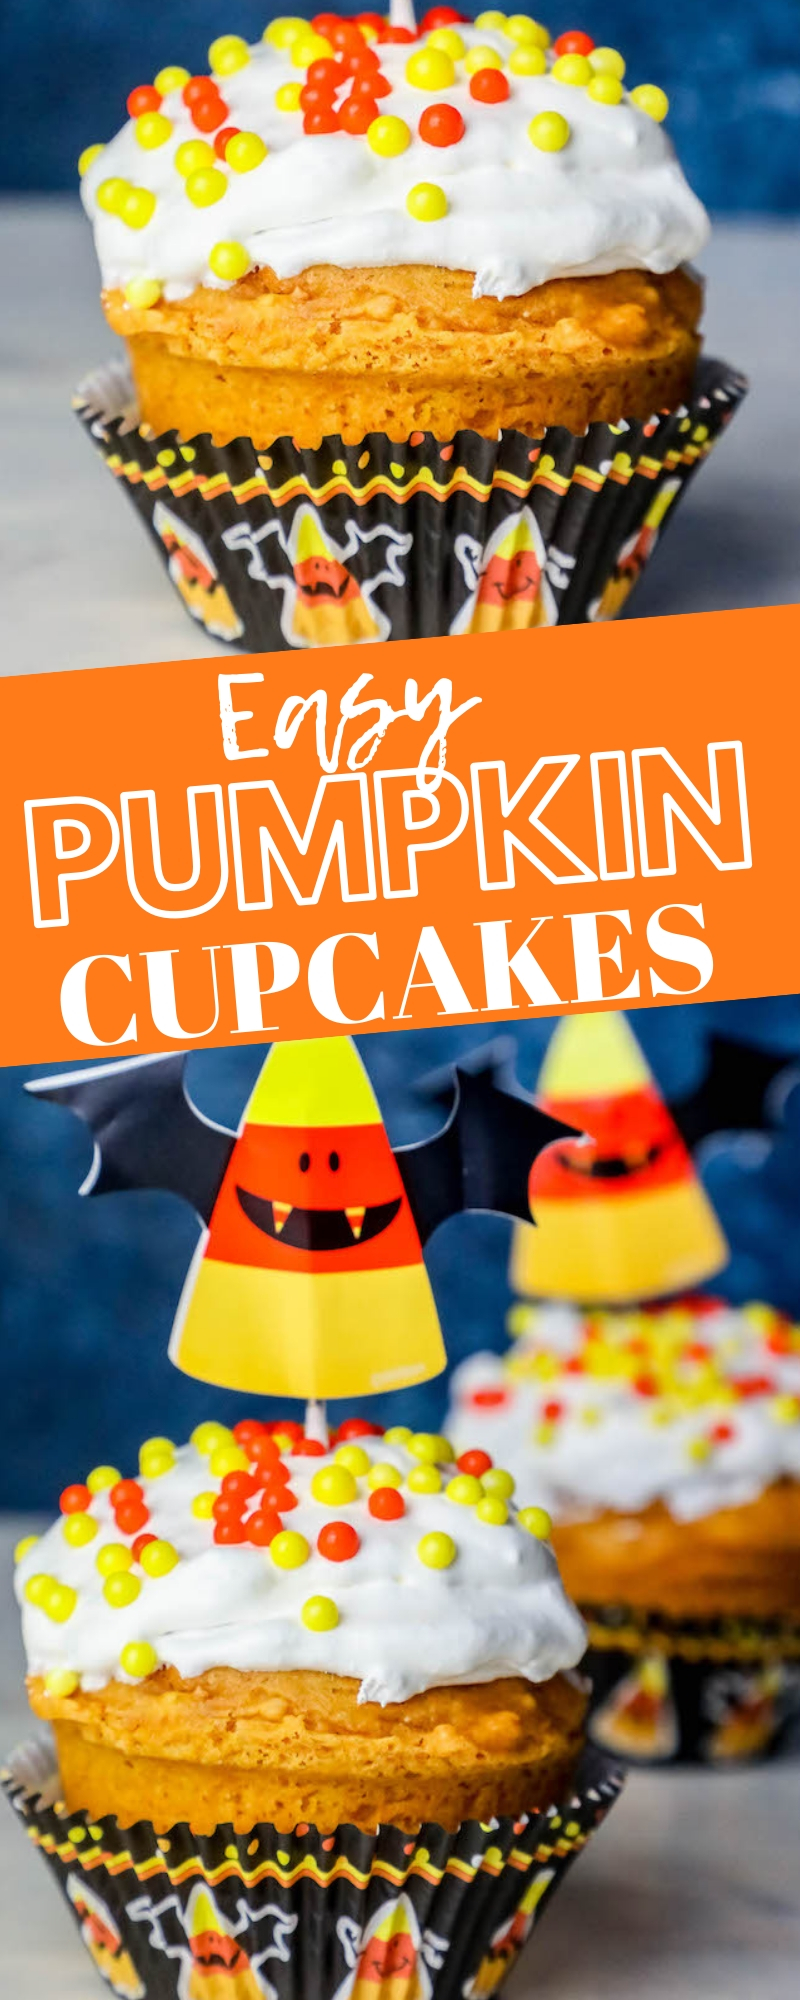 picture of a pumpkin cupcakes with white frosting and orange and yellow sprinkles and candycorn bats